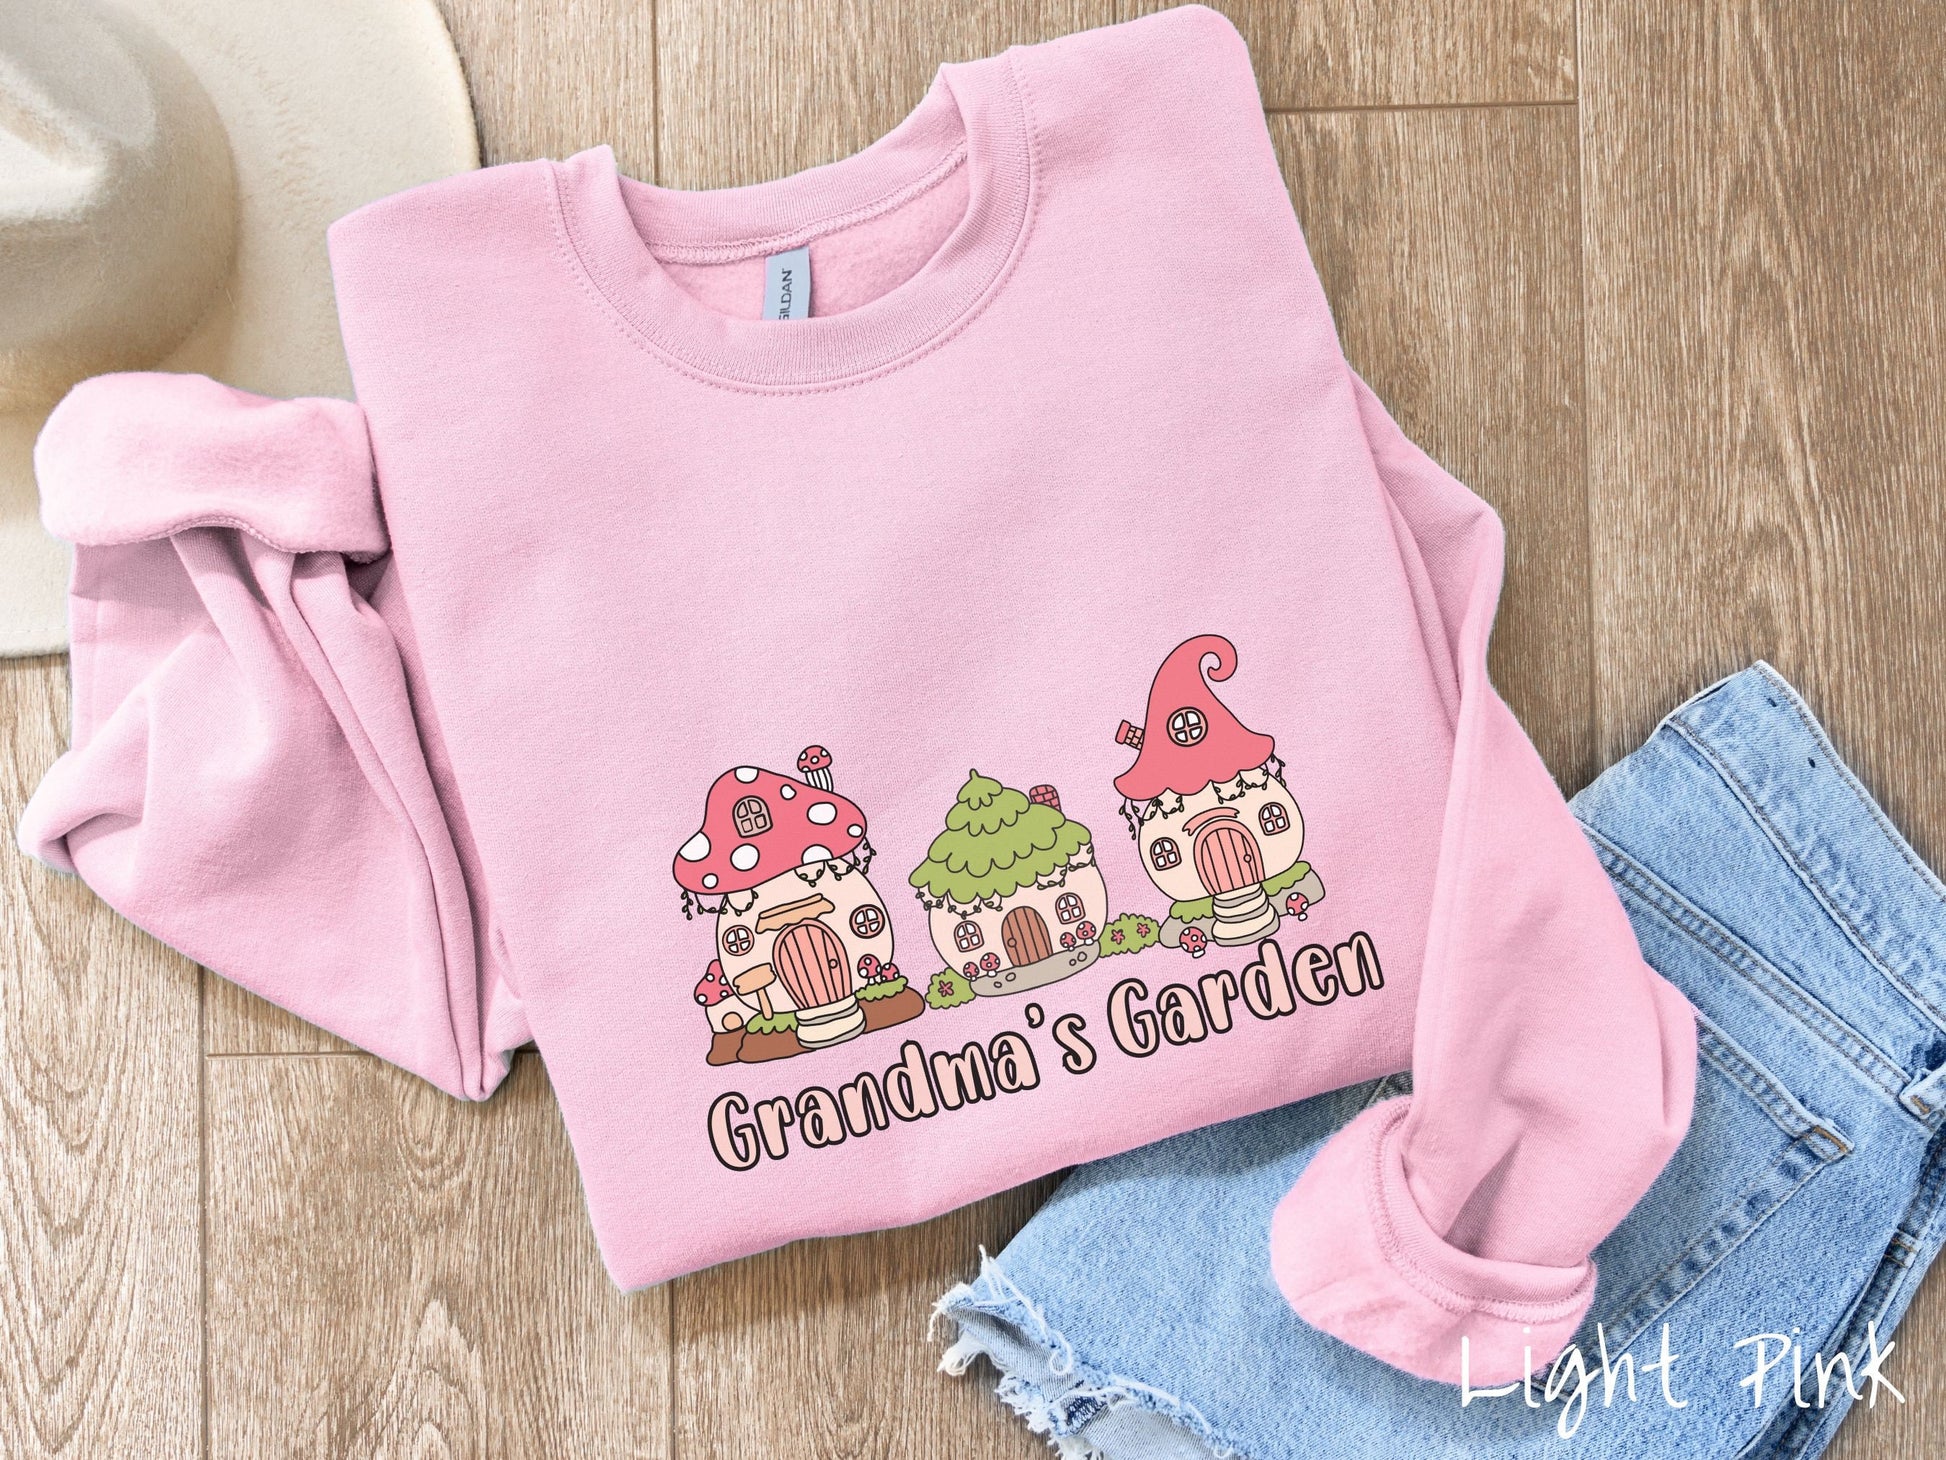 A cute, vintage light pink colored comfy sweatshirt with the text Grandmas Garden in light pink font. Above the text are cute little cottages for gnomes made from light and dark pink mushrooms.